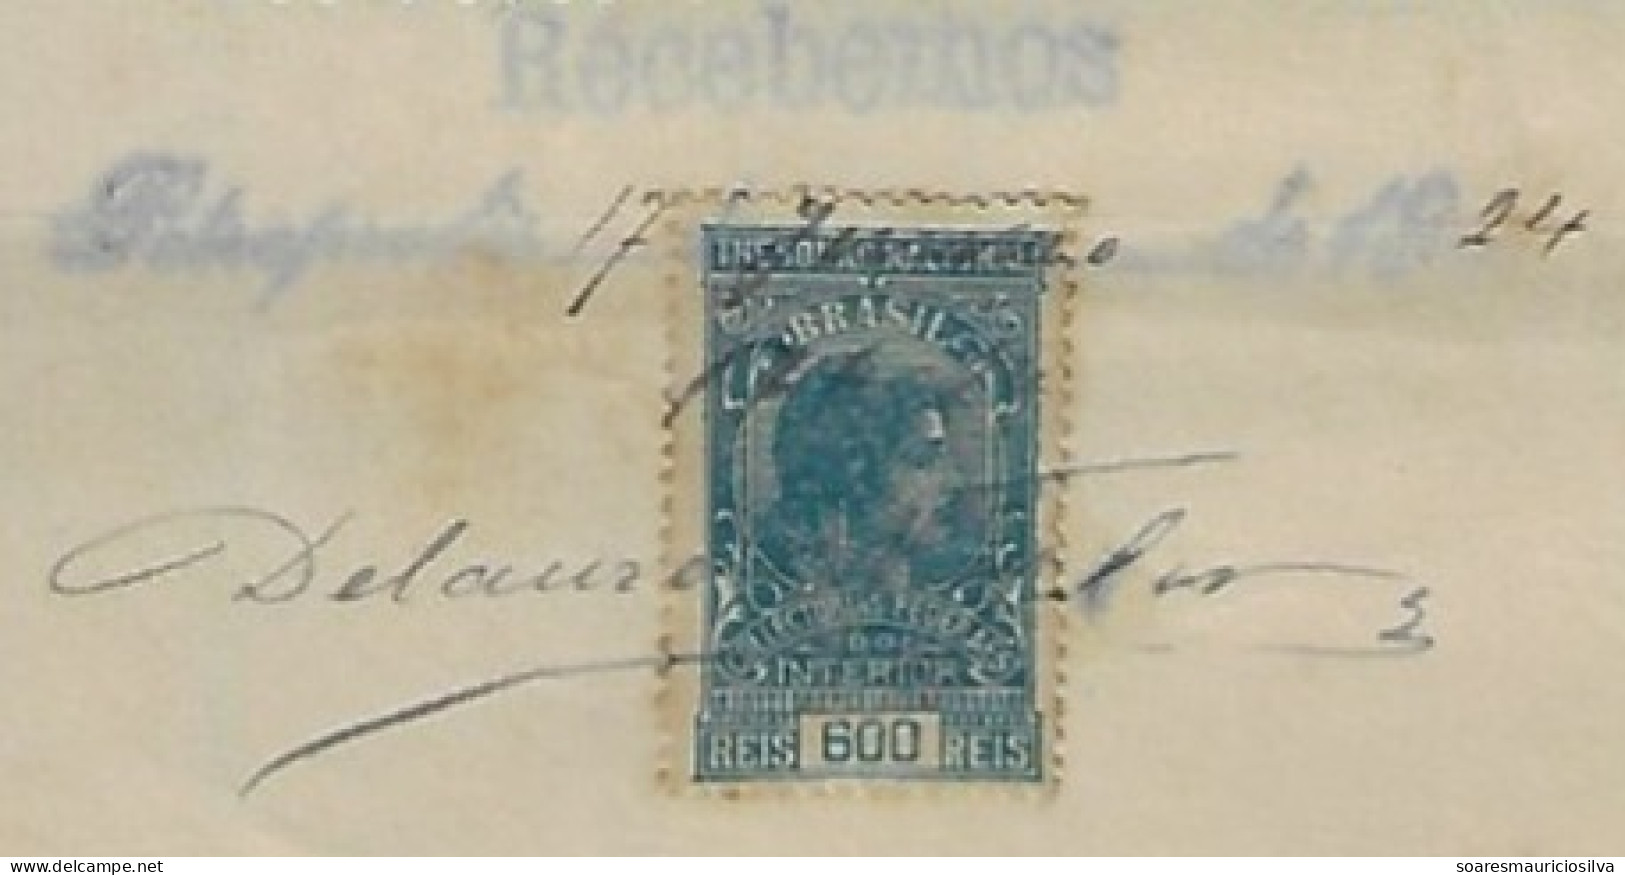 Brazil 1924 National Manufacture Leather Accessories For Textile Industry Invoice Petrópolis National Treasury Tax Stamp - Briefe U. Dokumente